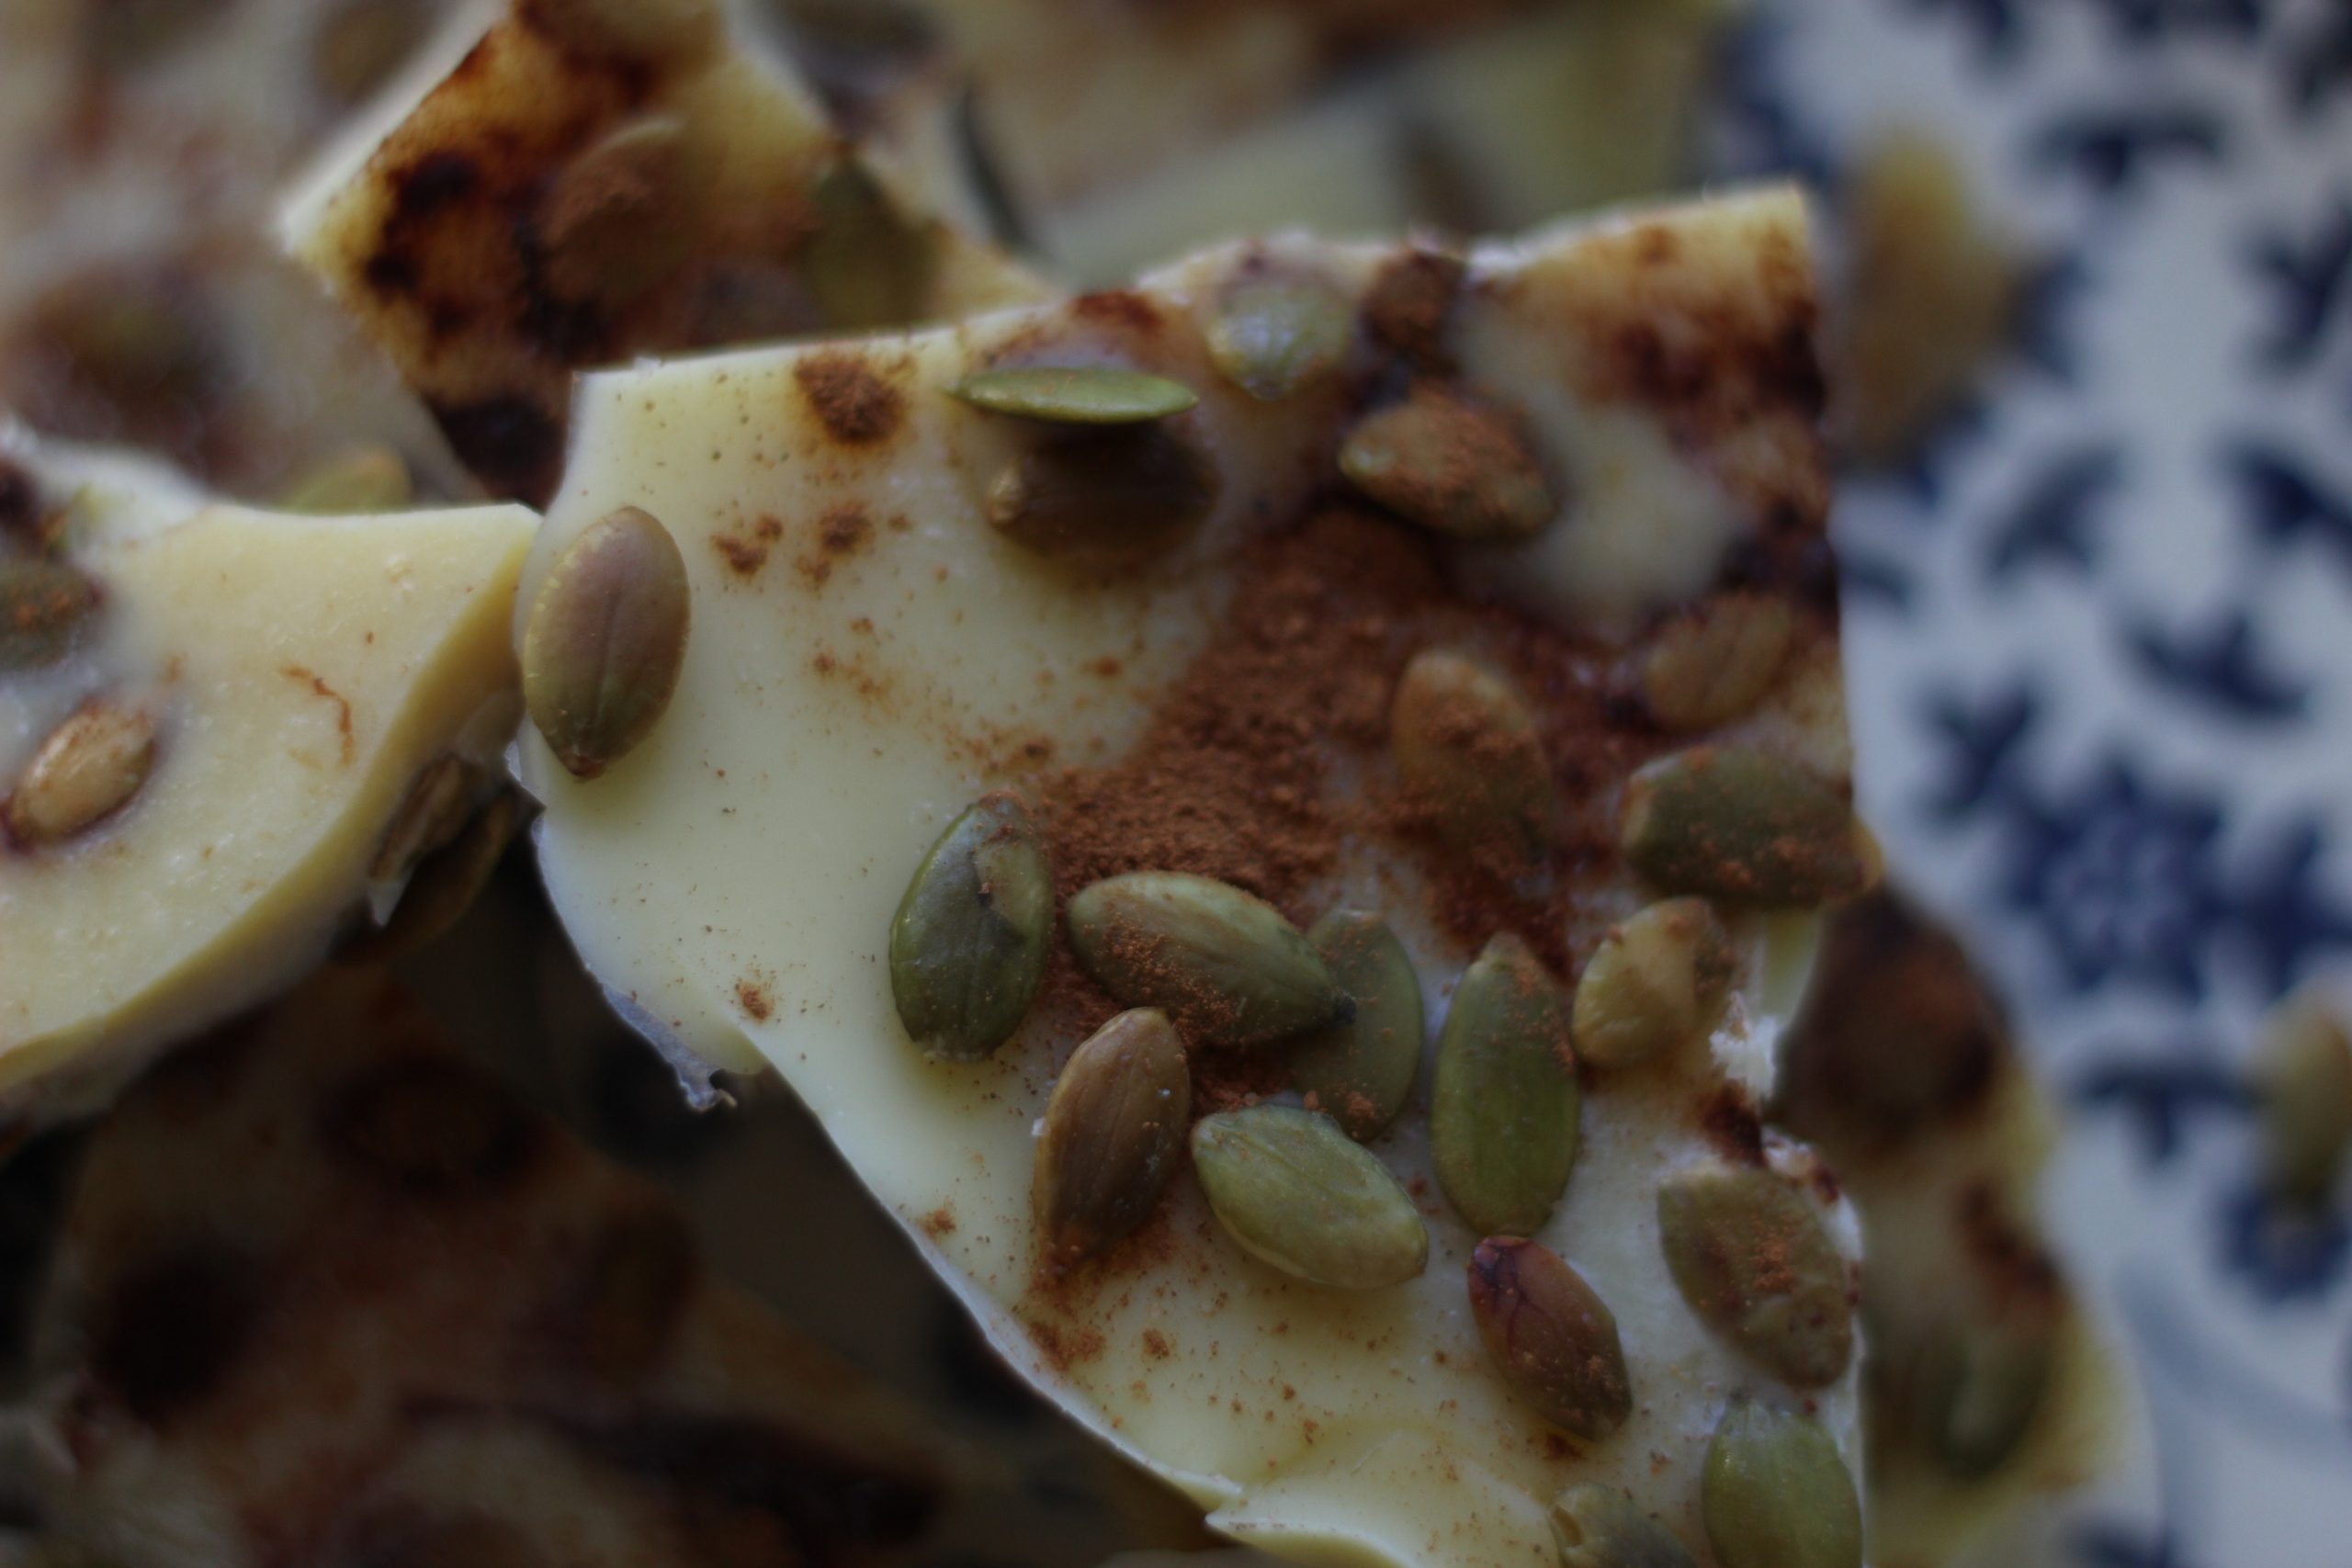 close-up photo of Pumpkin Seed Cacao Bark broken into large pieces on a plate